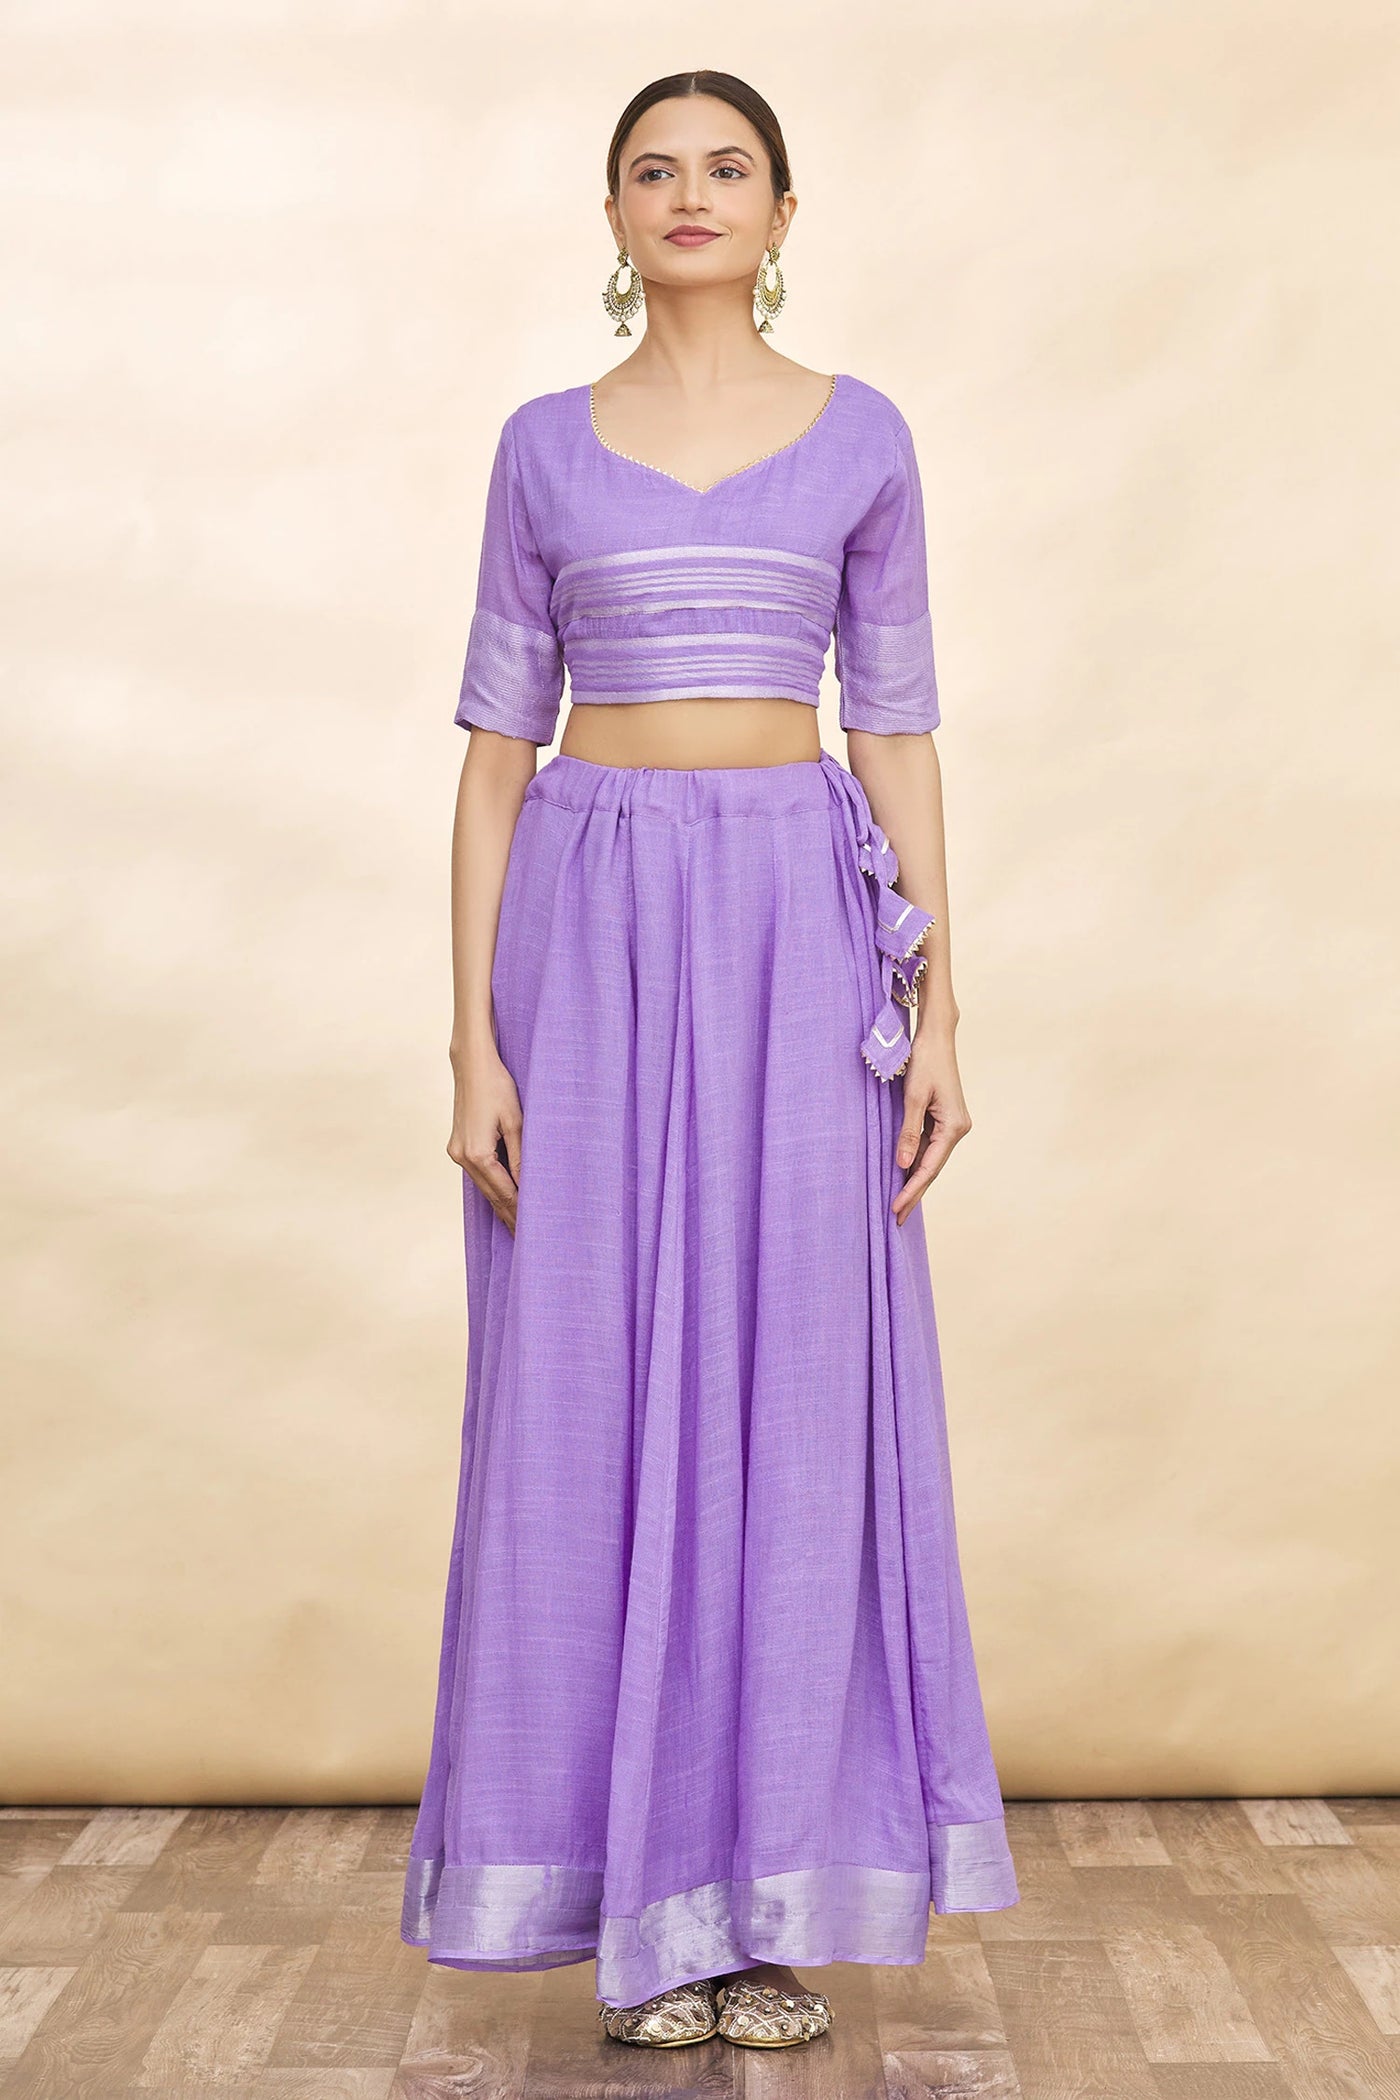 Purple Linen Cotton Lehenga - Indian Clothing in Denver, CO, Aurora, CO, Boulder, CO, Fort Collins, CO, Colorado Springs, CO, Parker, CO, Highlands Ranch, CO, Cherry Creek, CO, Centennial, CO, and Longmont, CO. Nationwide shipping USA - India Fashion X